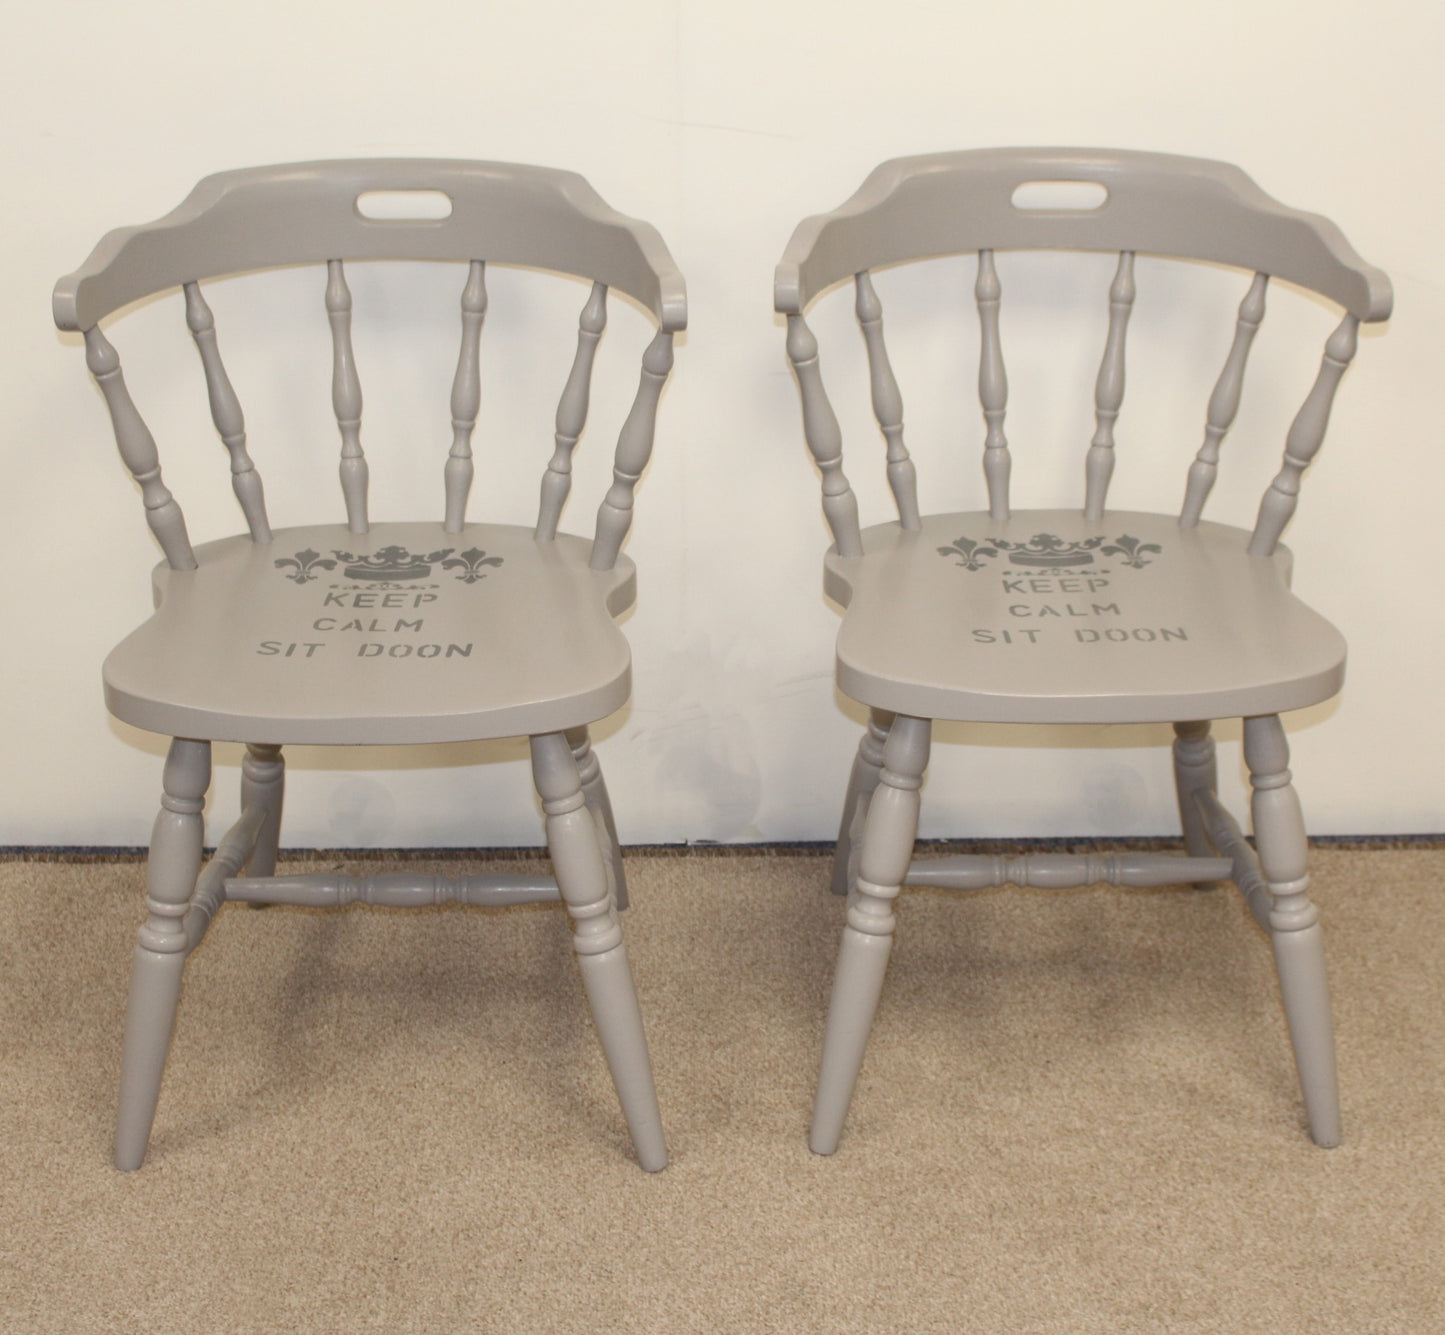 Pair of Upcycled Wooden Chairs.